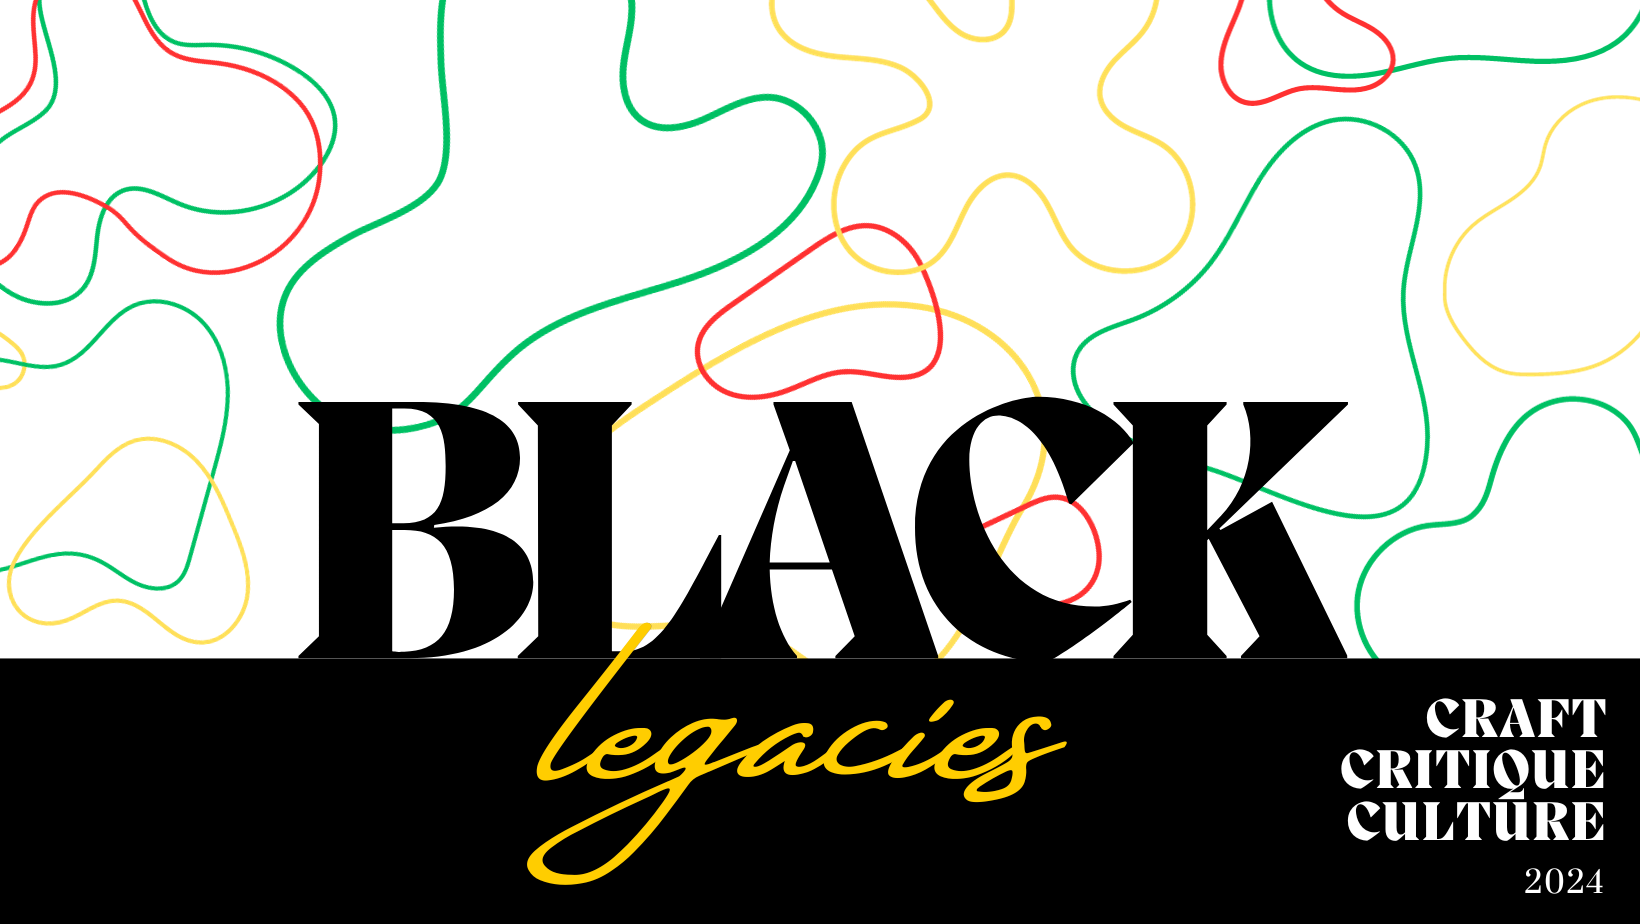 The image says, Black Legacies Craft Critique Culture 2024. The background is white with green, yellow, and red wavy lines